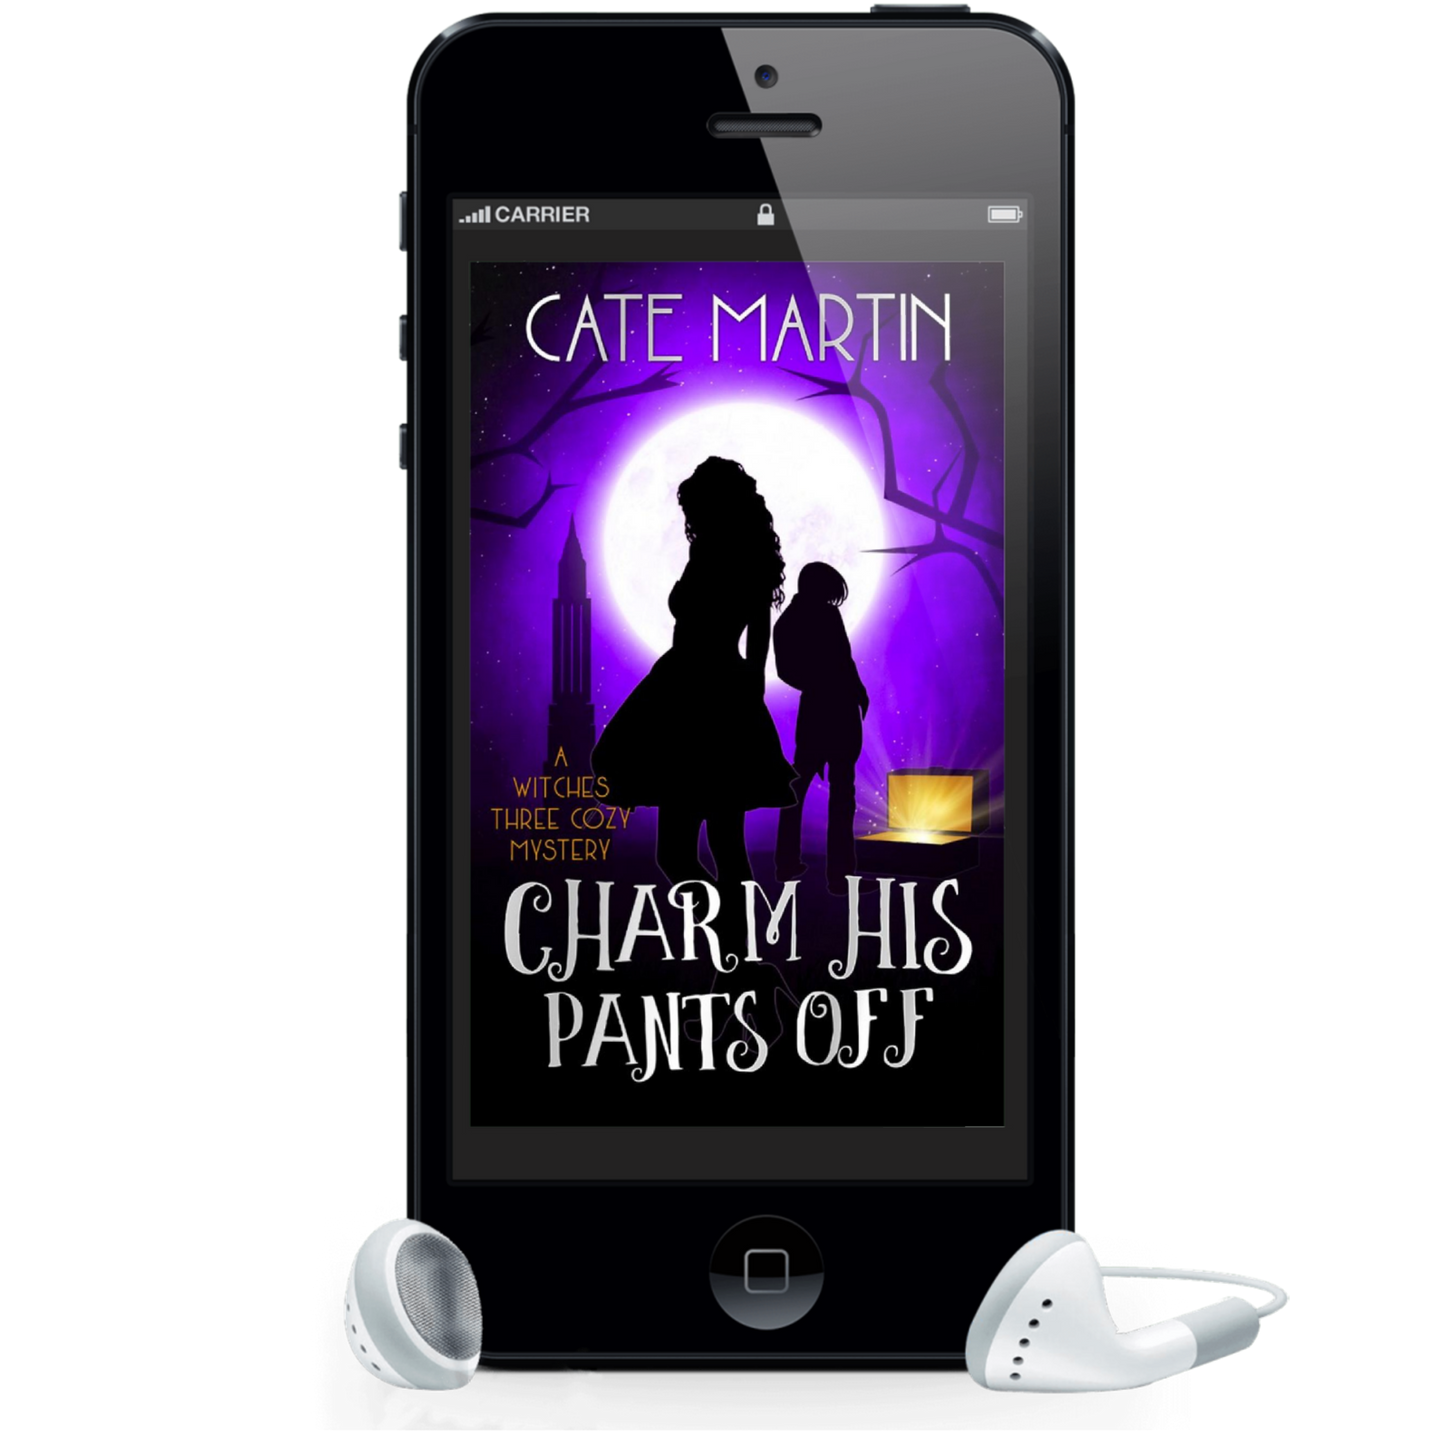 Cover of the audiobook of Charm His Pants Off: A Witches Three Cozy Mystery.